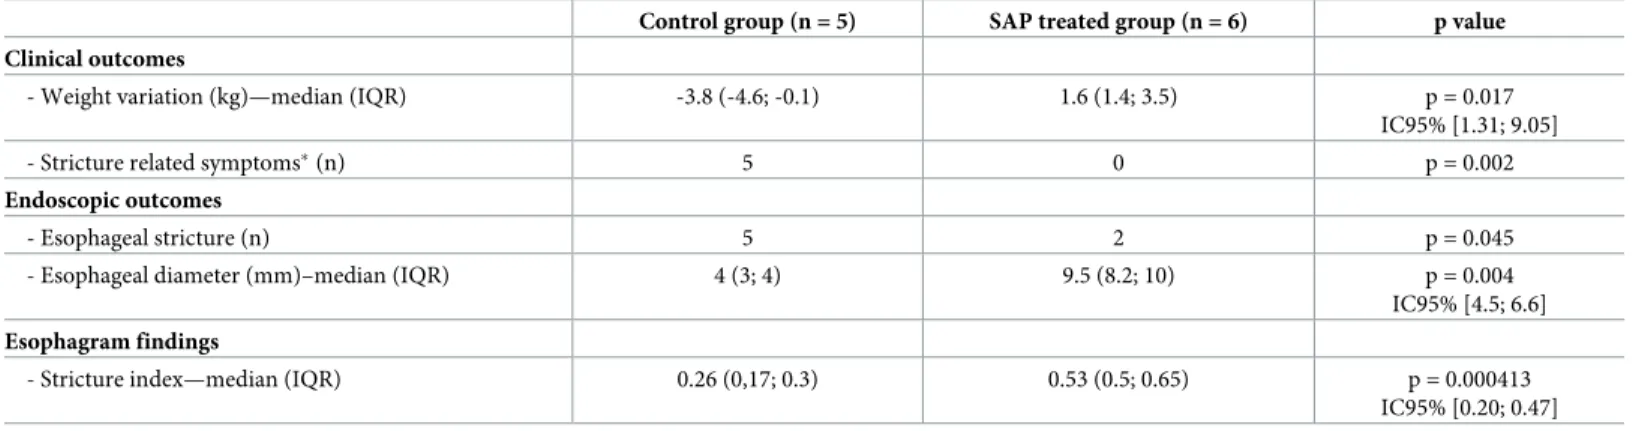 Table 1. Clinical and endoscopic outcomes in the SAP treated and control groups at day 14 after esophageal circumferential endoscopic submucosal dissection.